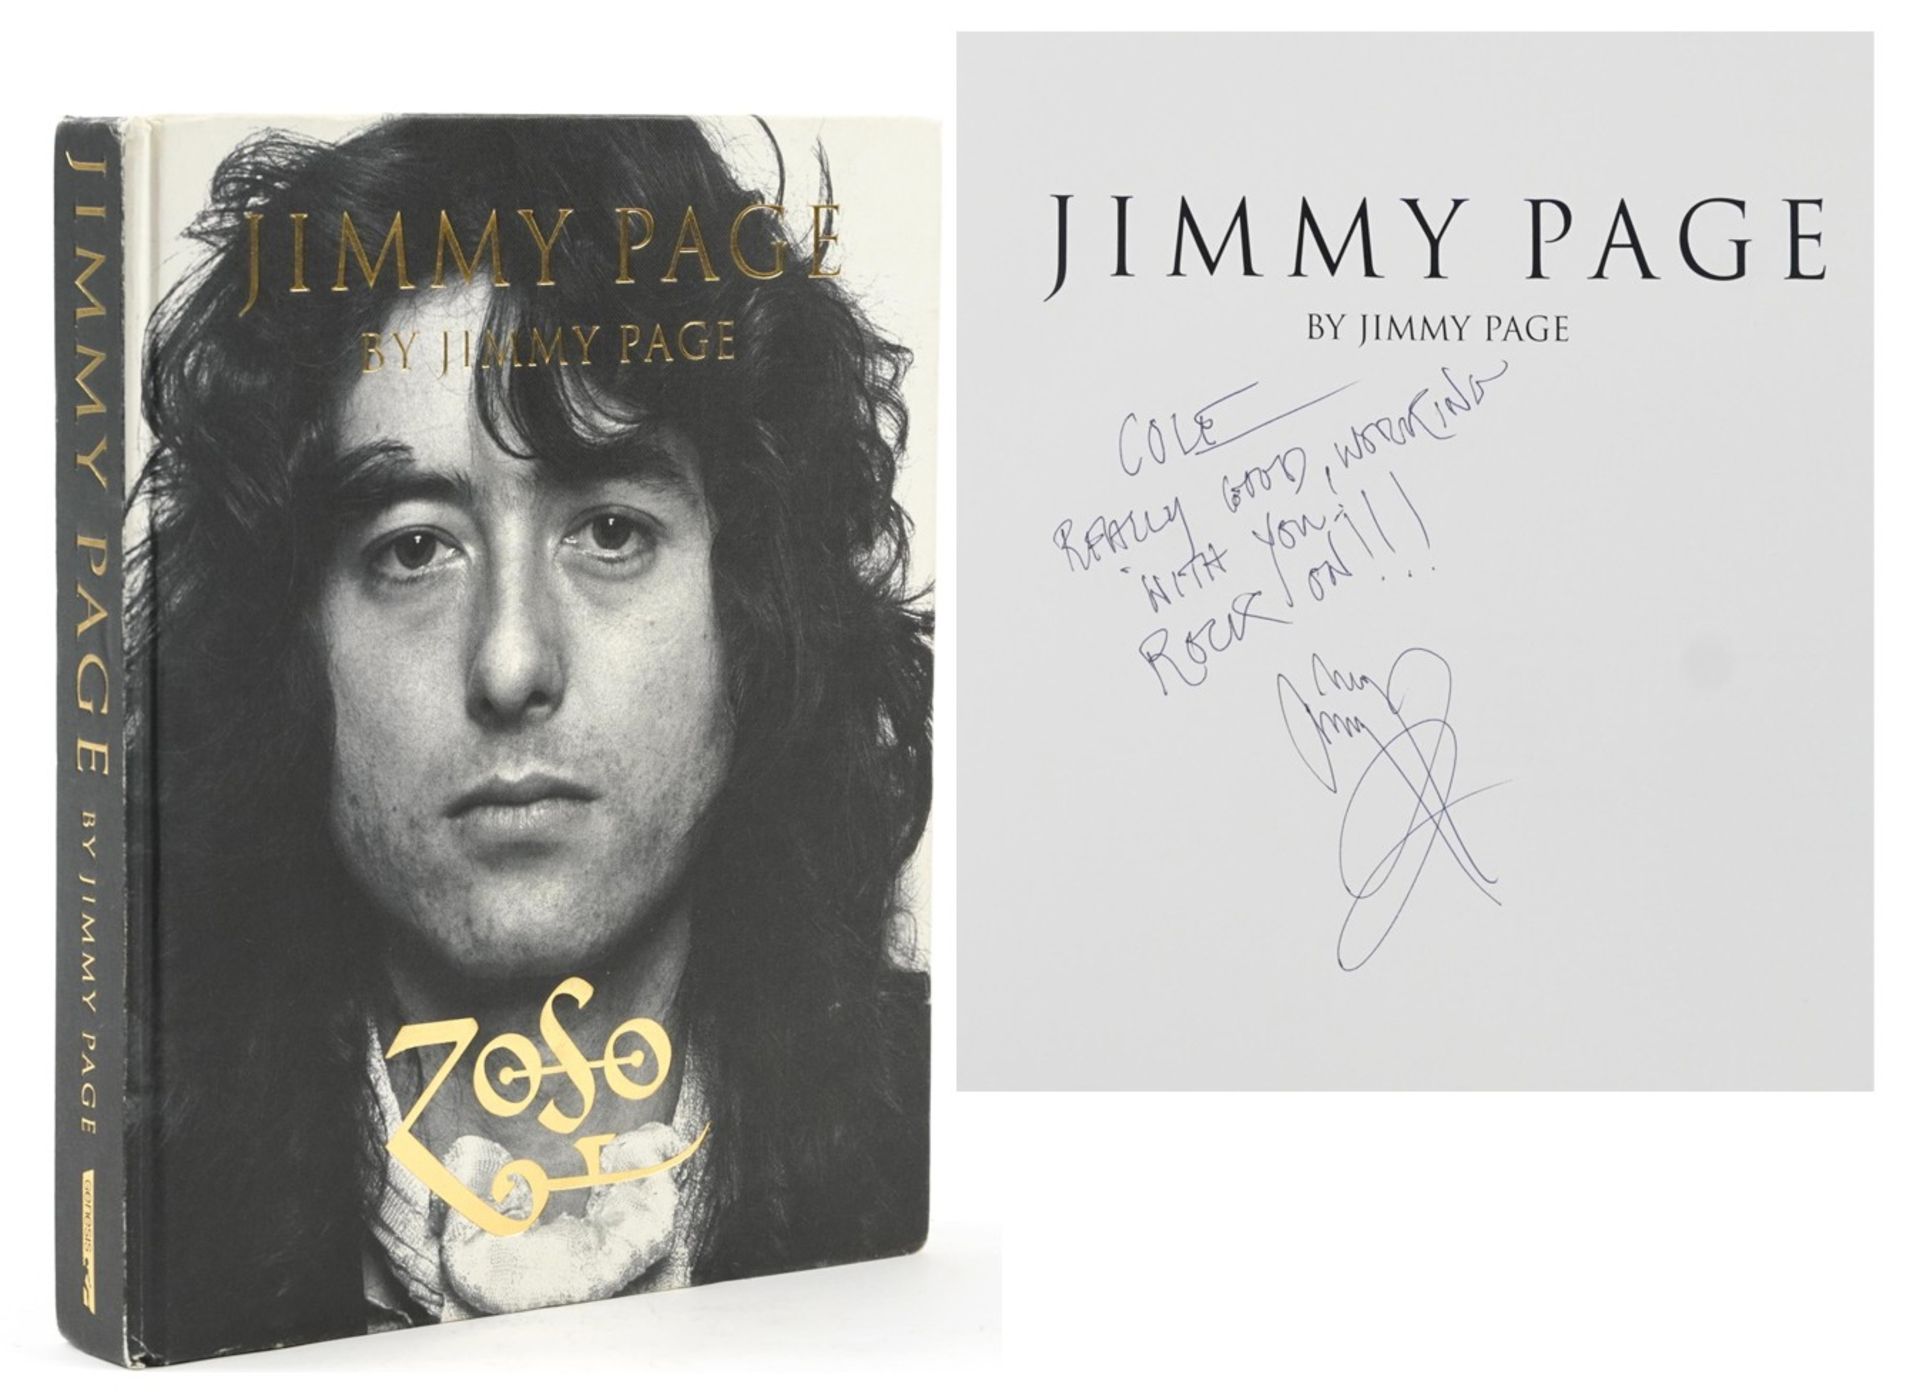 Jimmy Page by Jimmy Page, hardback book signed by Jimmy Page and inscribed Cole really good